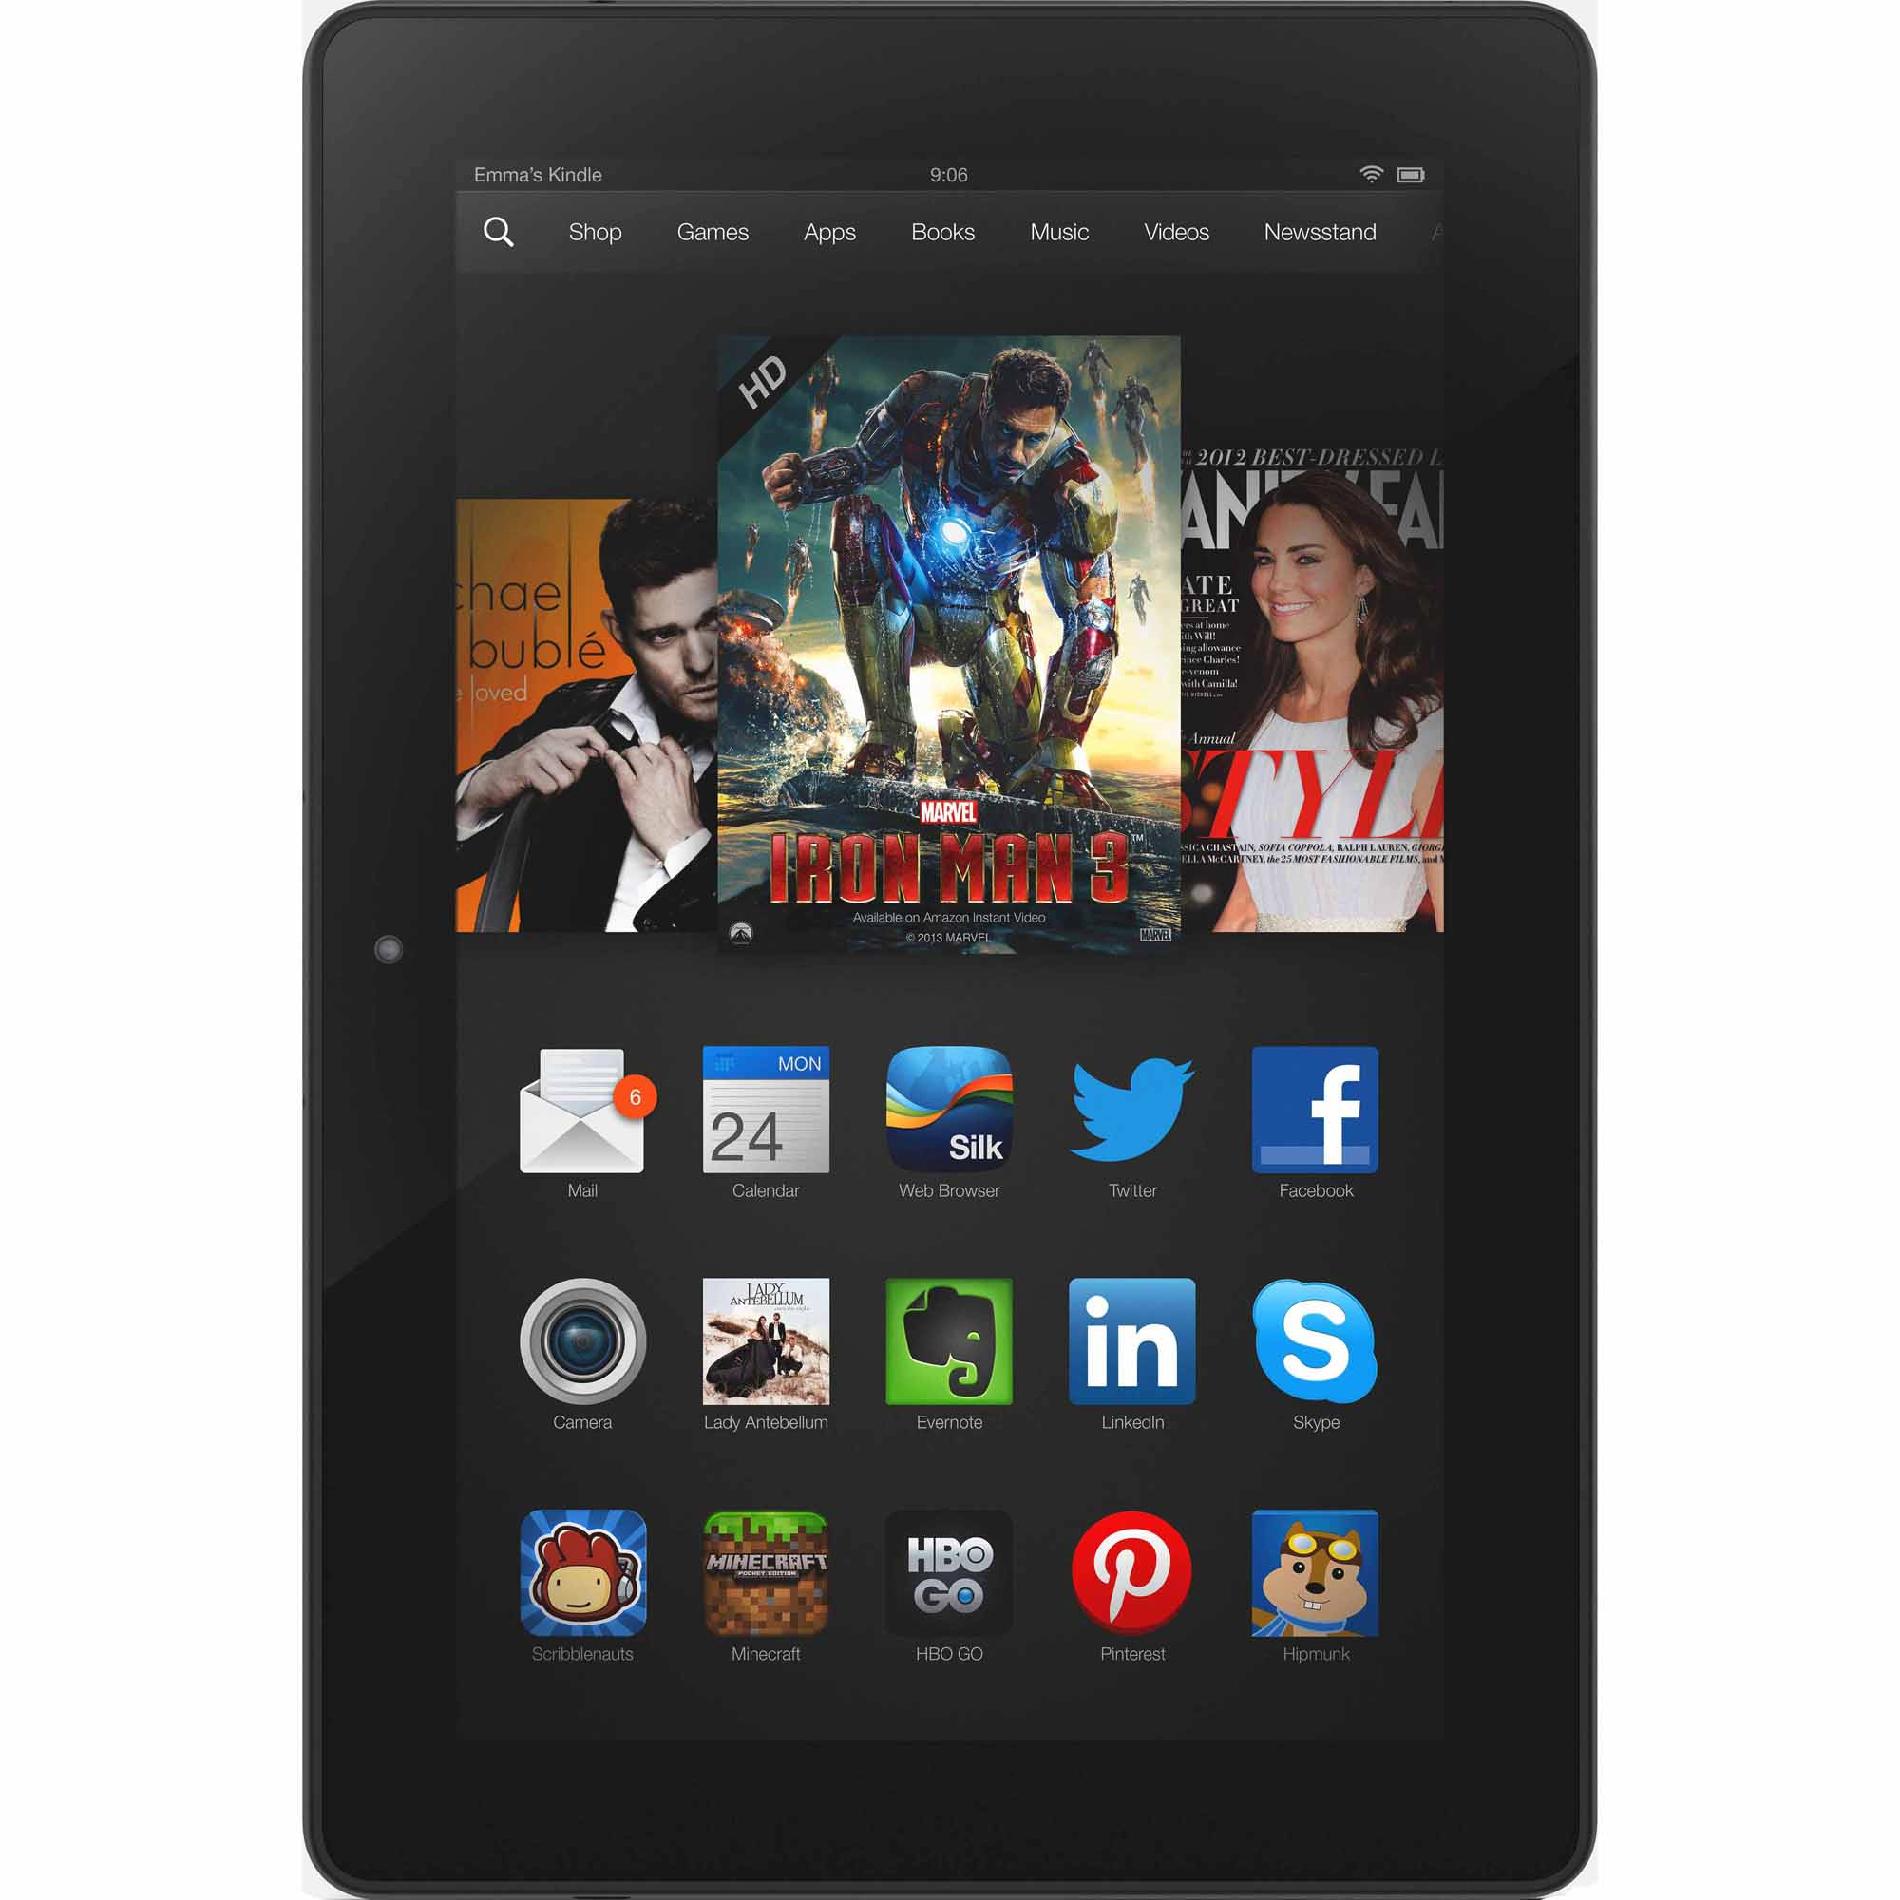 Kindle Fire HDX 8.9 in. - 16GB